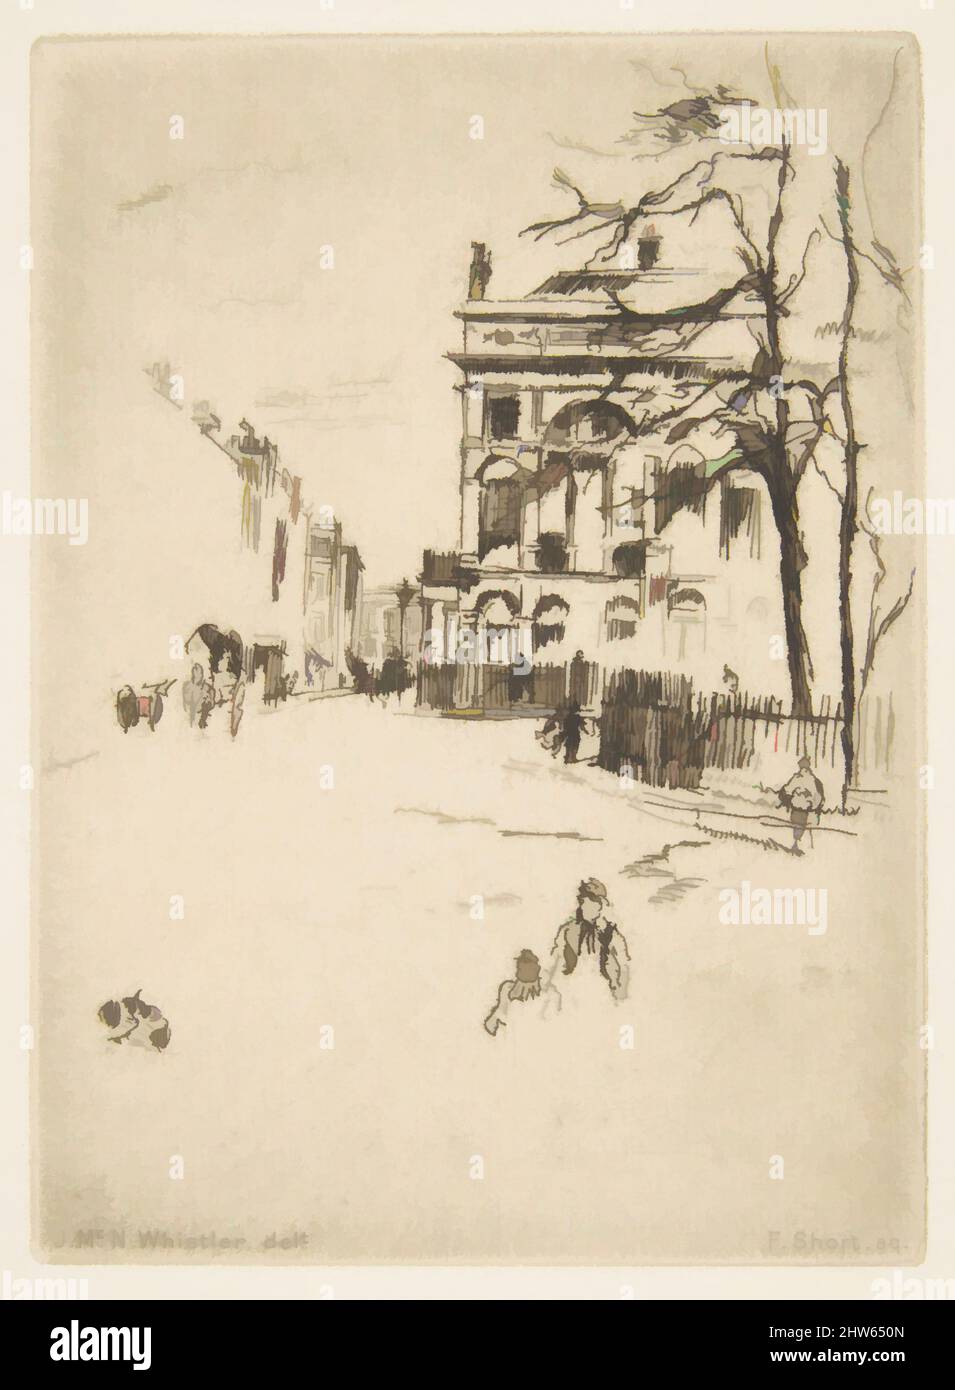 Art inspired by Fitzroy Square (Street Scene), 1878–81, Etching; third state of three (Glasgow); printed in brownish-black ink on medium weight laid paper, Sheet: 8 7/8 × 6 13/16 in. (22.5 × 17.3 cm), Prints, After James McNeill Whistler (American, Lowell, Massachusetts 1834–1903, Classic works modernized by Artotop with a splash of modernity. Shapes, color and value, eye-catching visual impact on art. Emotions through freedom of artworks in a contemporary way. A timeless message pursuing a wildly creative new direction. Artists turning to the digital medium and creating the Artotop NFT Stock Photo